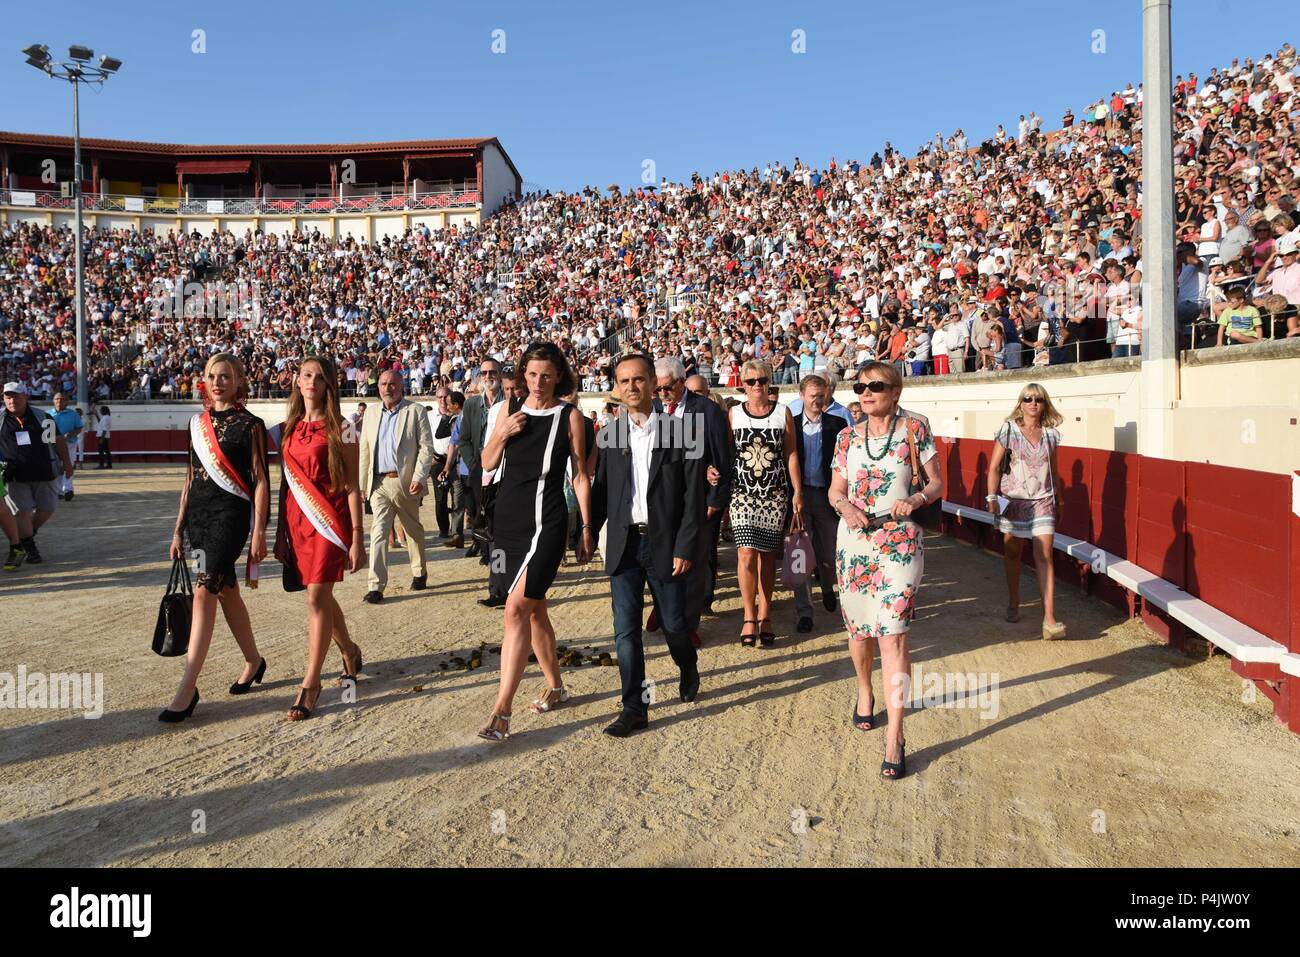 August 12, 2015 - Beziers, France: Beziers mayor Robert Menard (C) and his wife Emmanuelle Duverger march during a Virgin Mary procession from the town centre to the bullfighting arena. The town's new mayor, Robert Menard, has allowed the procession as well a large public mass to take part in the arena as part of his municipal programme to reinvigorate the town's Catholic traditions. Arrivee du maire de Beziers, Robert Menard, et sa femme Emmanuelle Duverger dans les arenes pour la messe en plein air qui precede l'ouverture de la corrida. Stock Photo